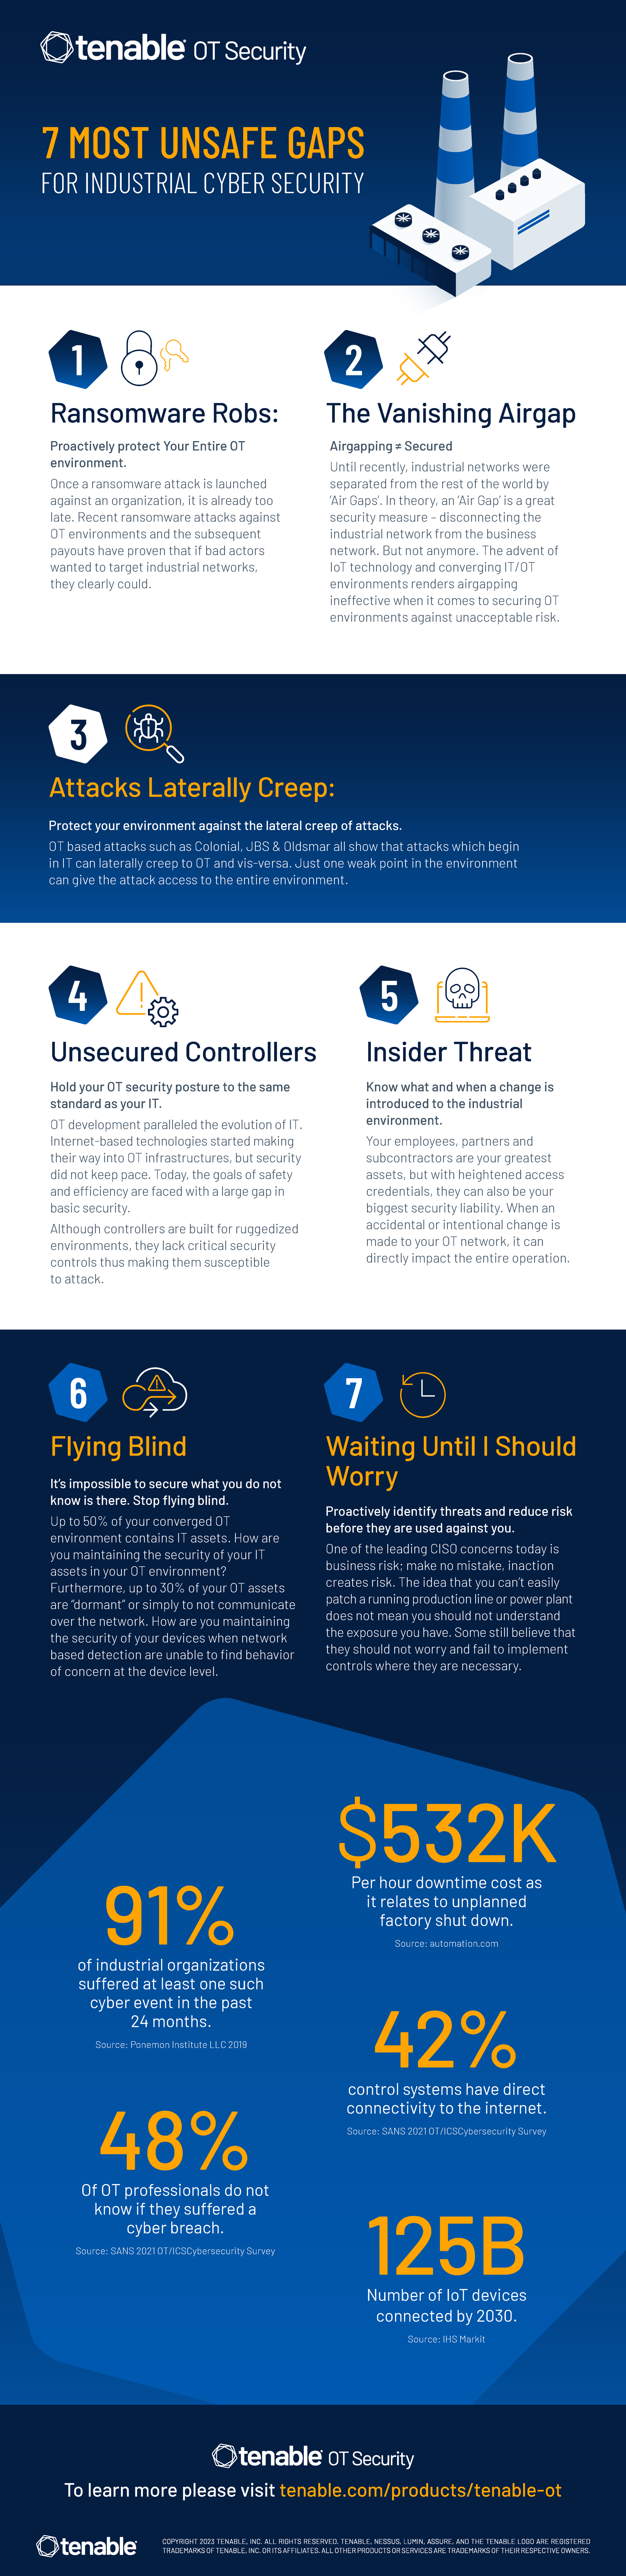 7 Most Unsafe Gaps for Industrial Cybersecurity Infographic